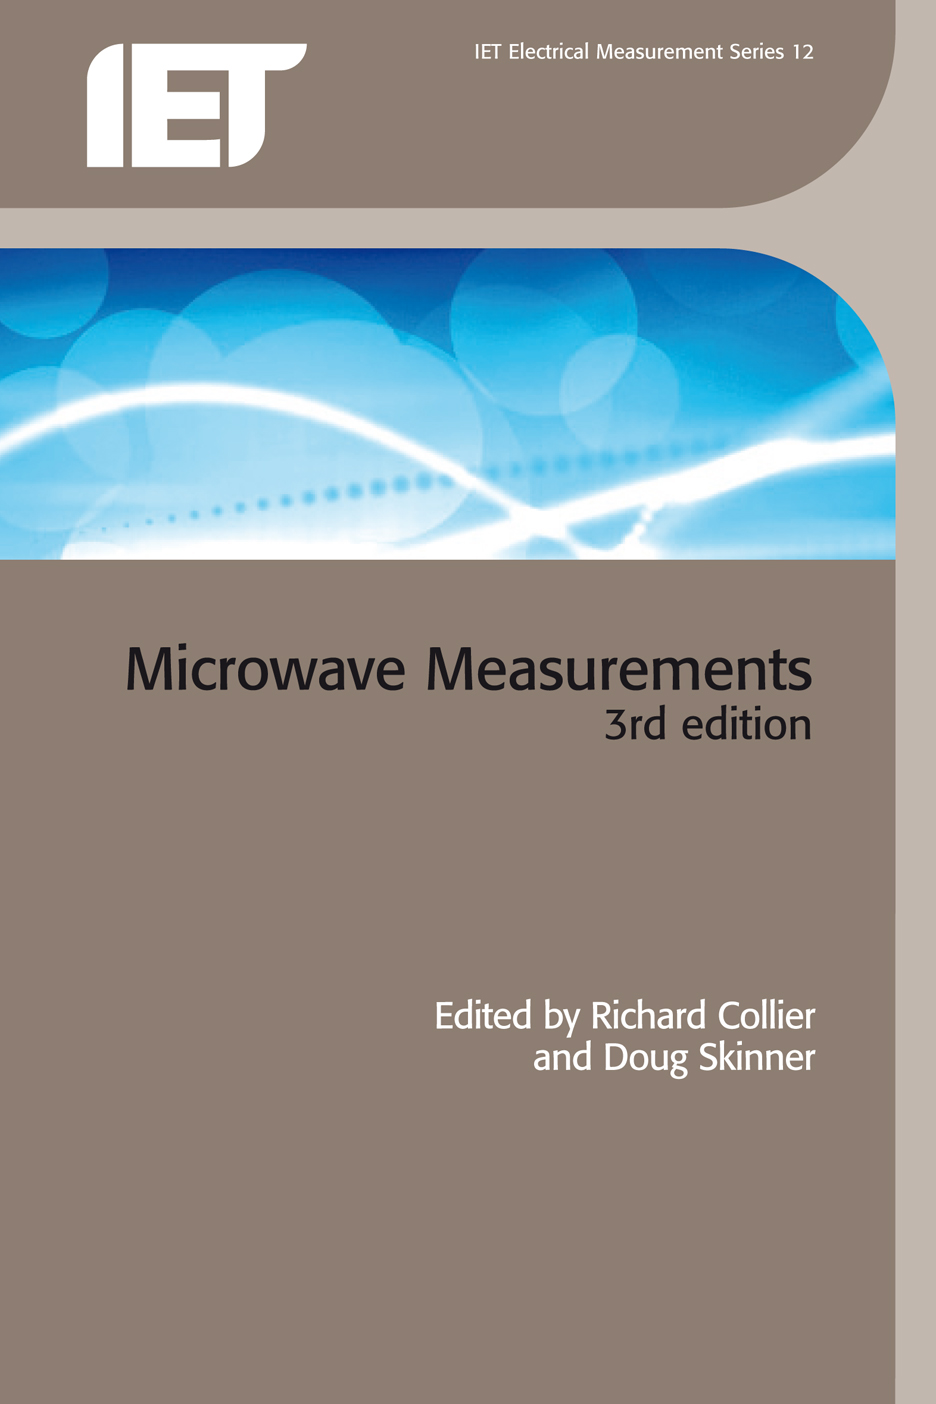 Microwave Measurements, 3rd Edition